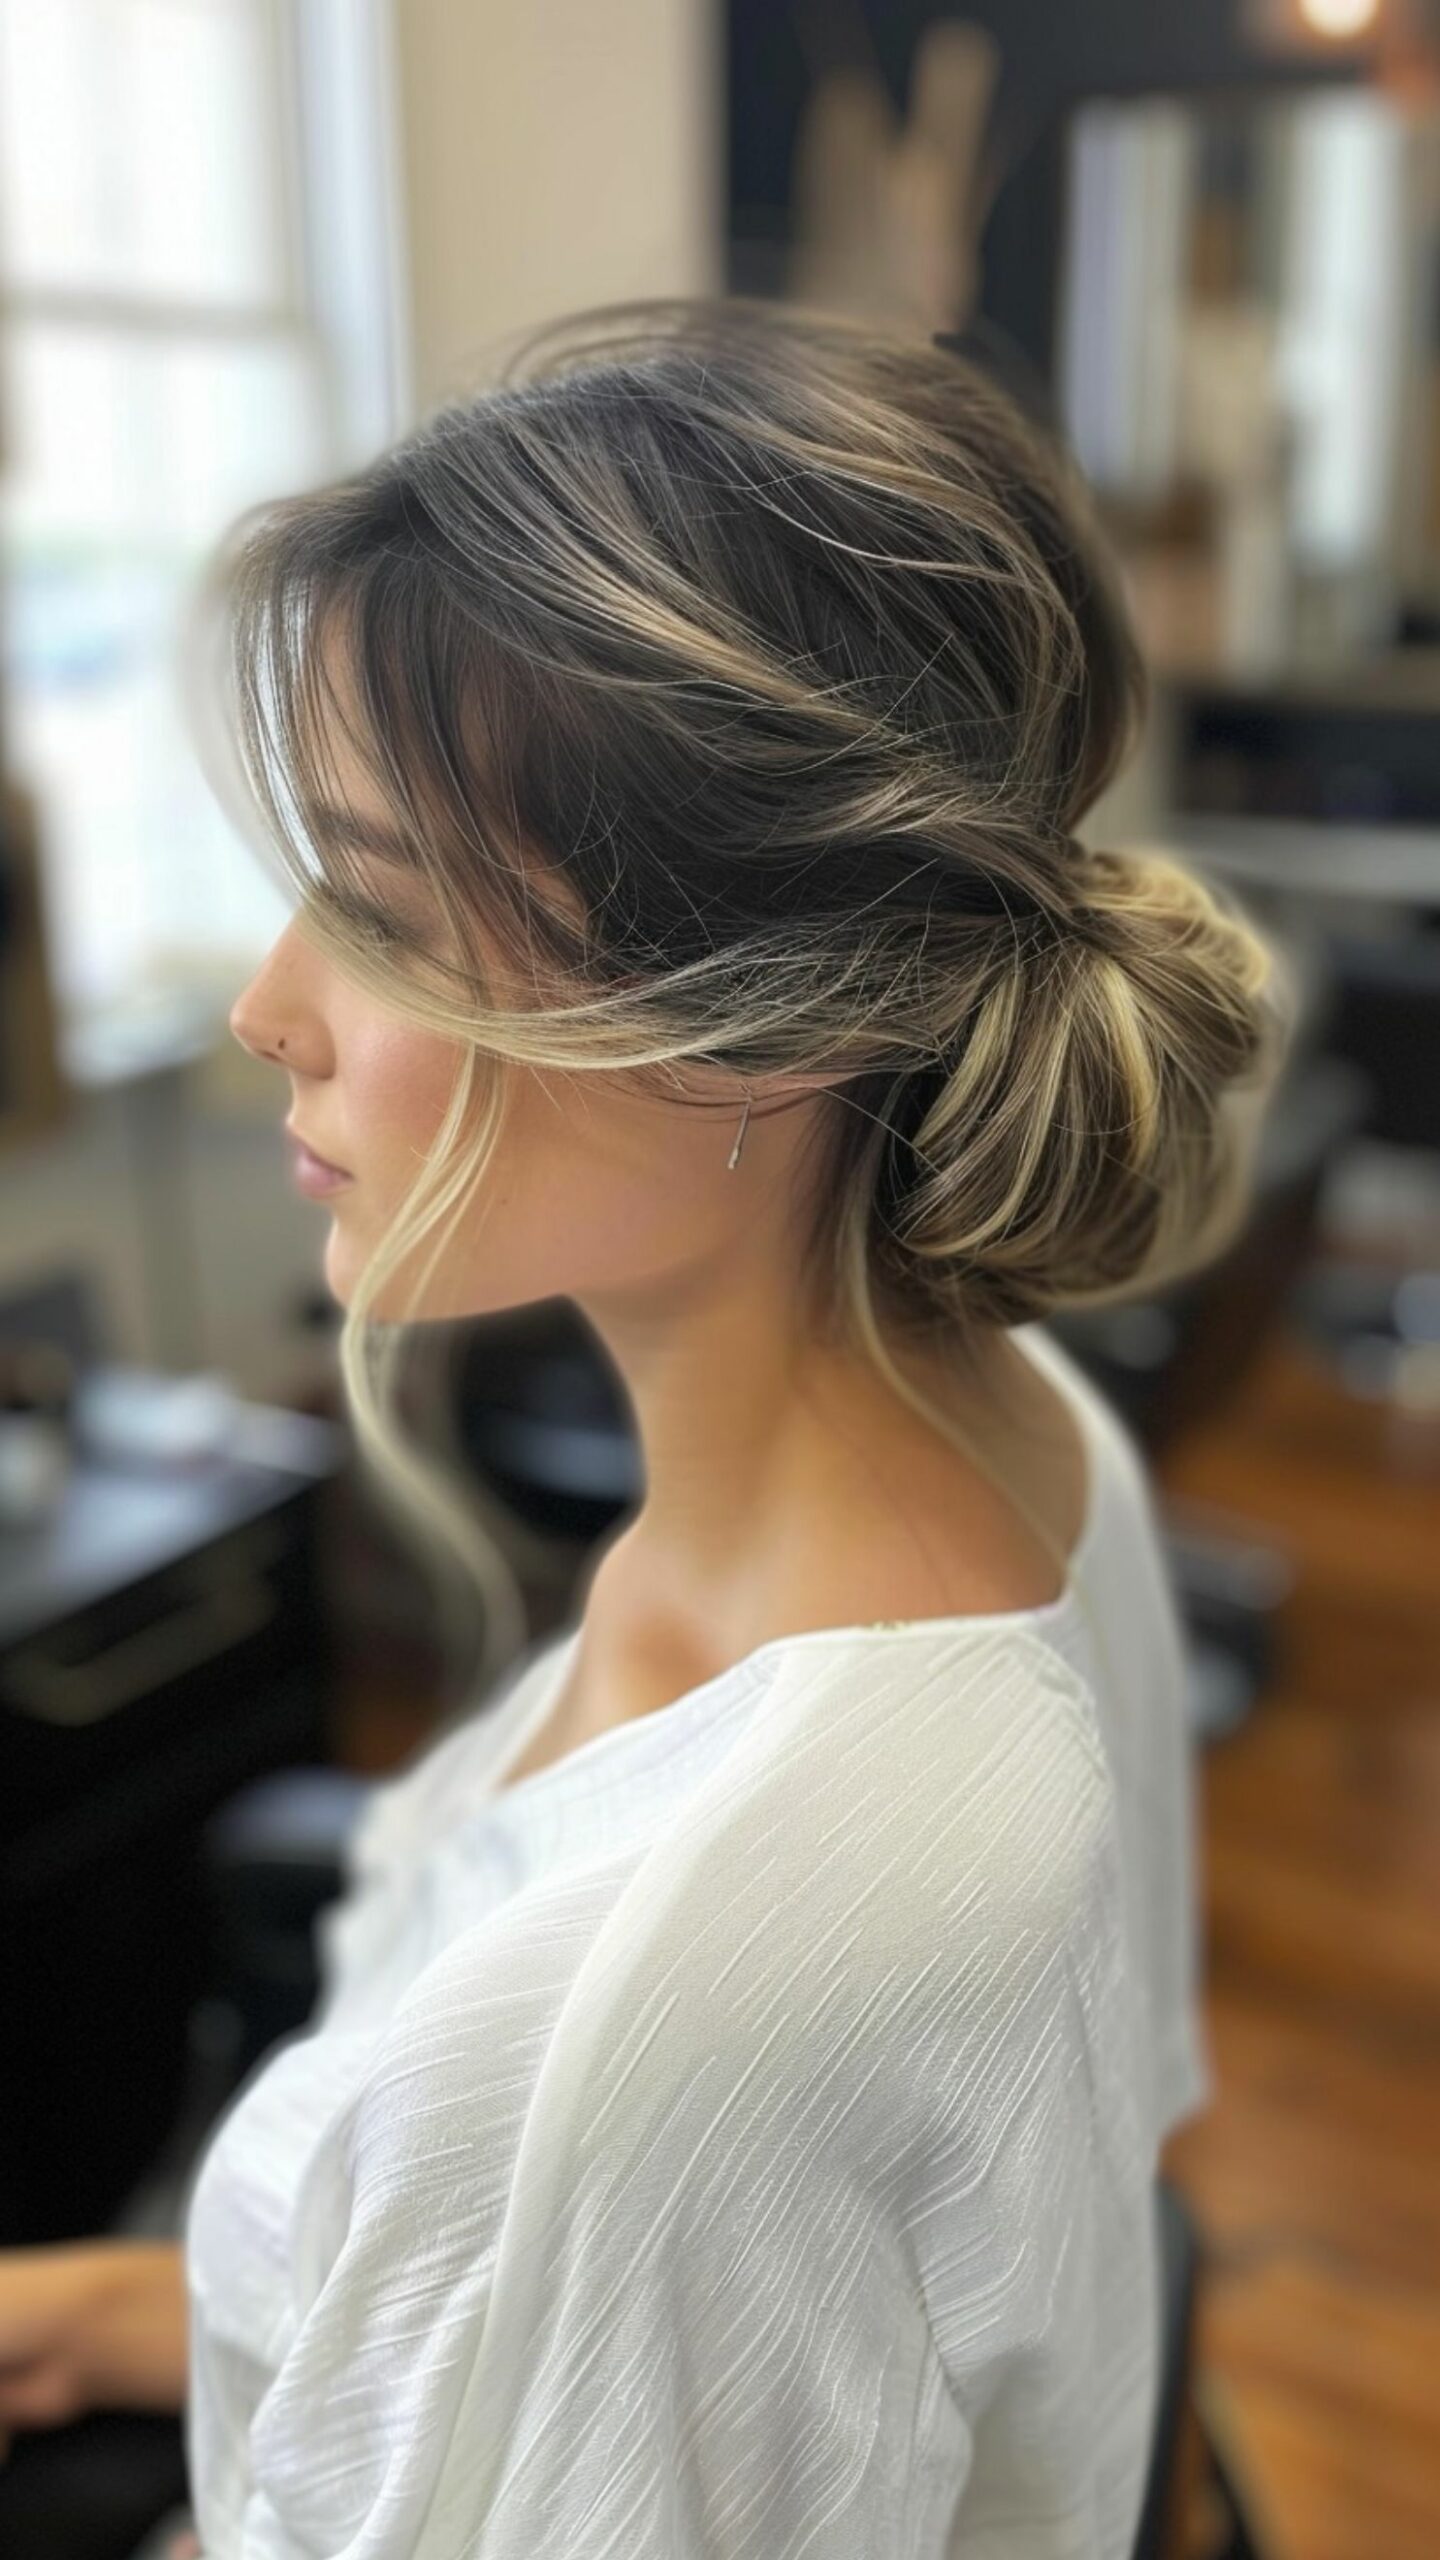 A woman modelling a low chignon with side swept bangs hairstyle.